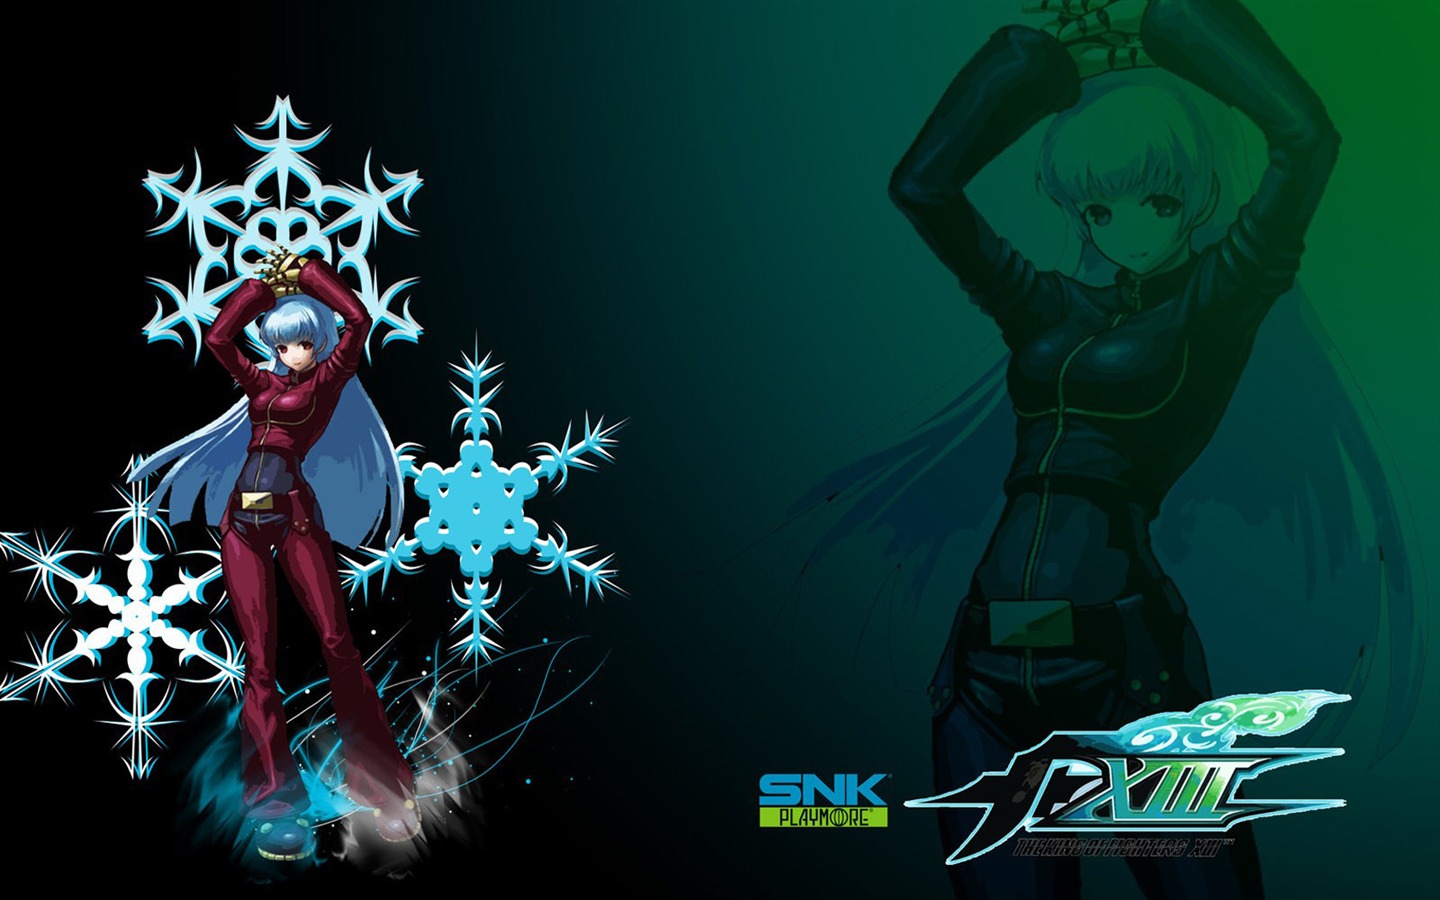 The King of Fighters XIII wallpapers #15 - 1440x900